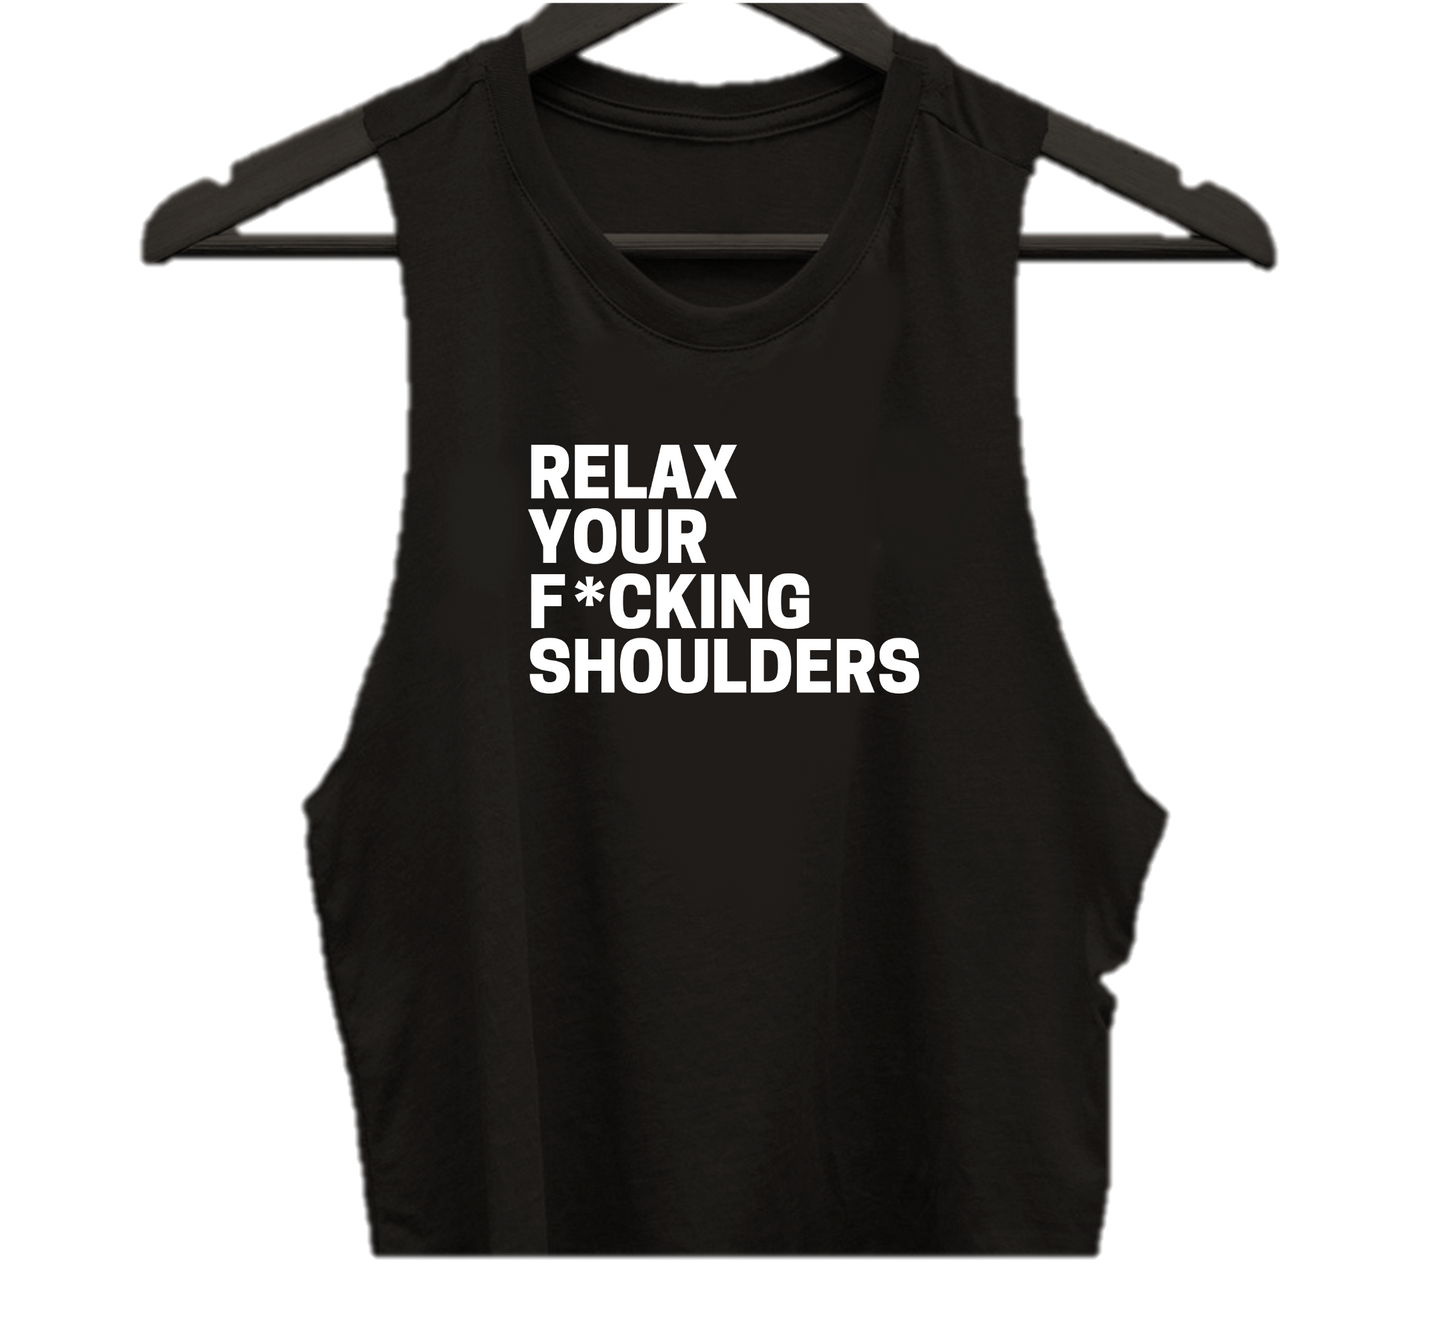 RELAX YOUR F*CKING SHOULDERS